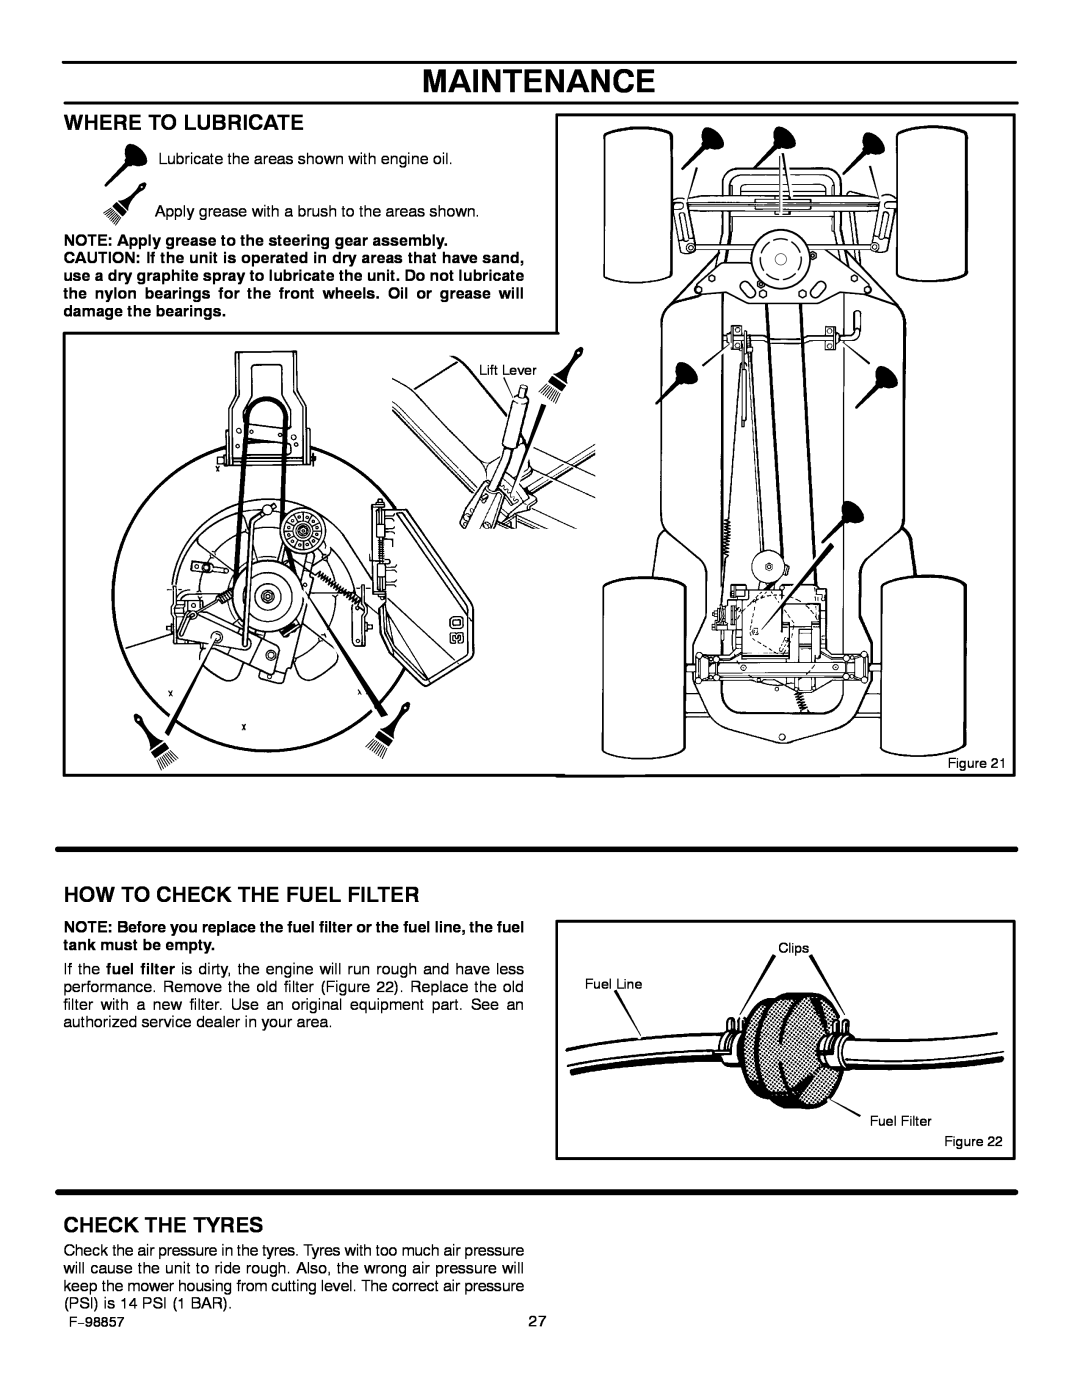 Hayter Mowers 30-Dec manual Where To Lubricate, How To Check The Fuel Filter, Maintenance, Check The Tyres 